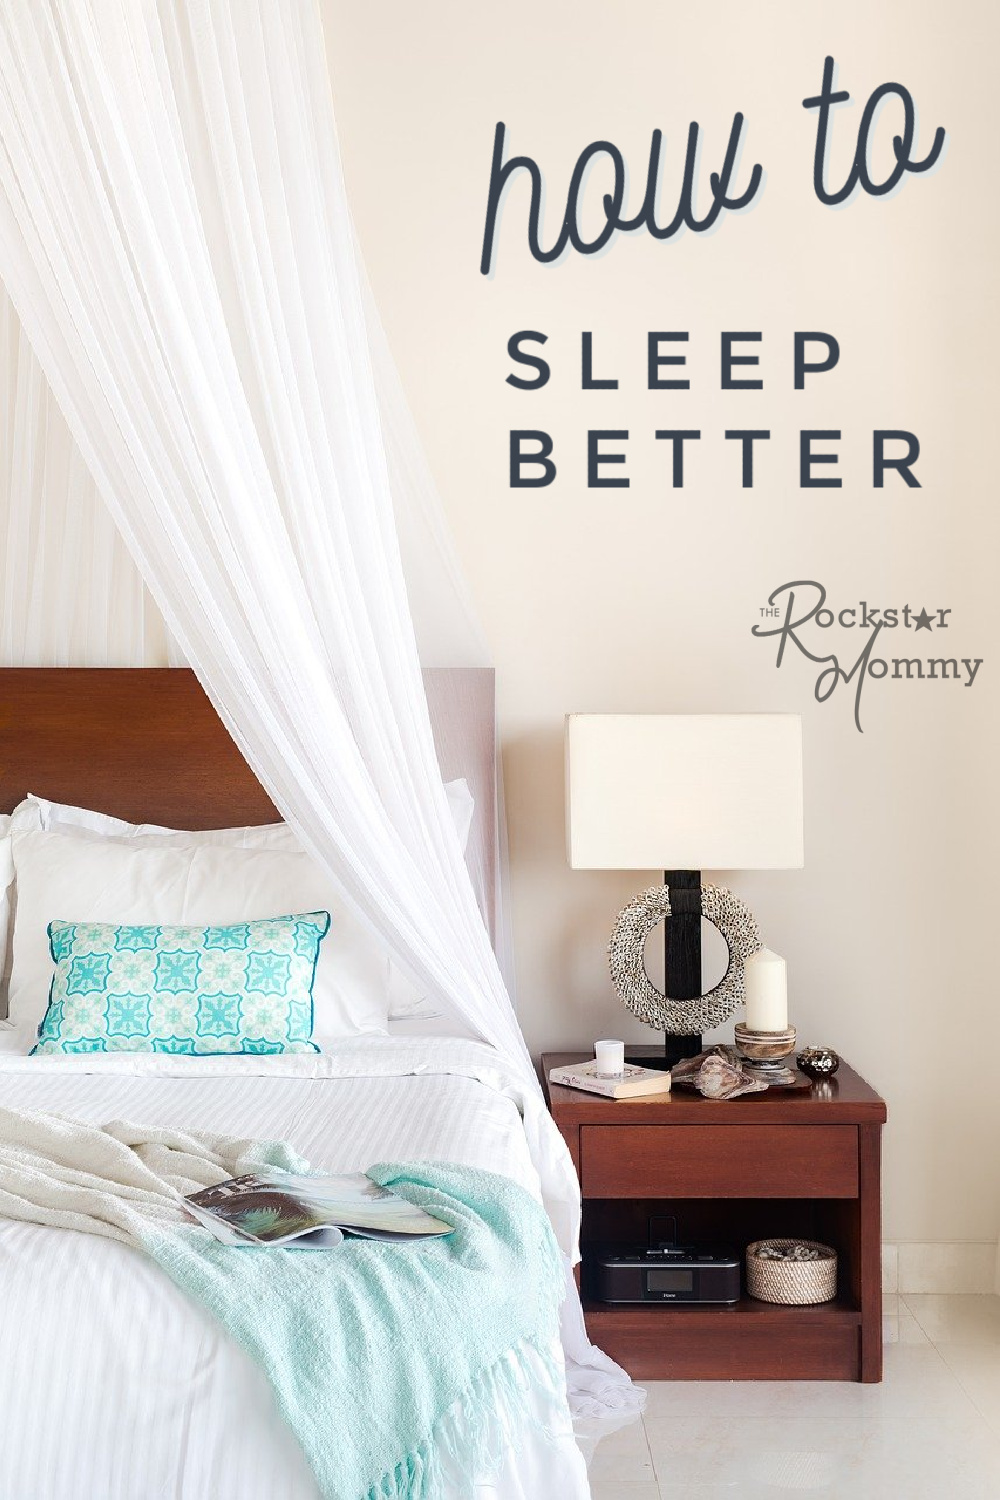 image of a bed and a night stand - with text on image "how to sleep better"